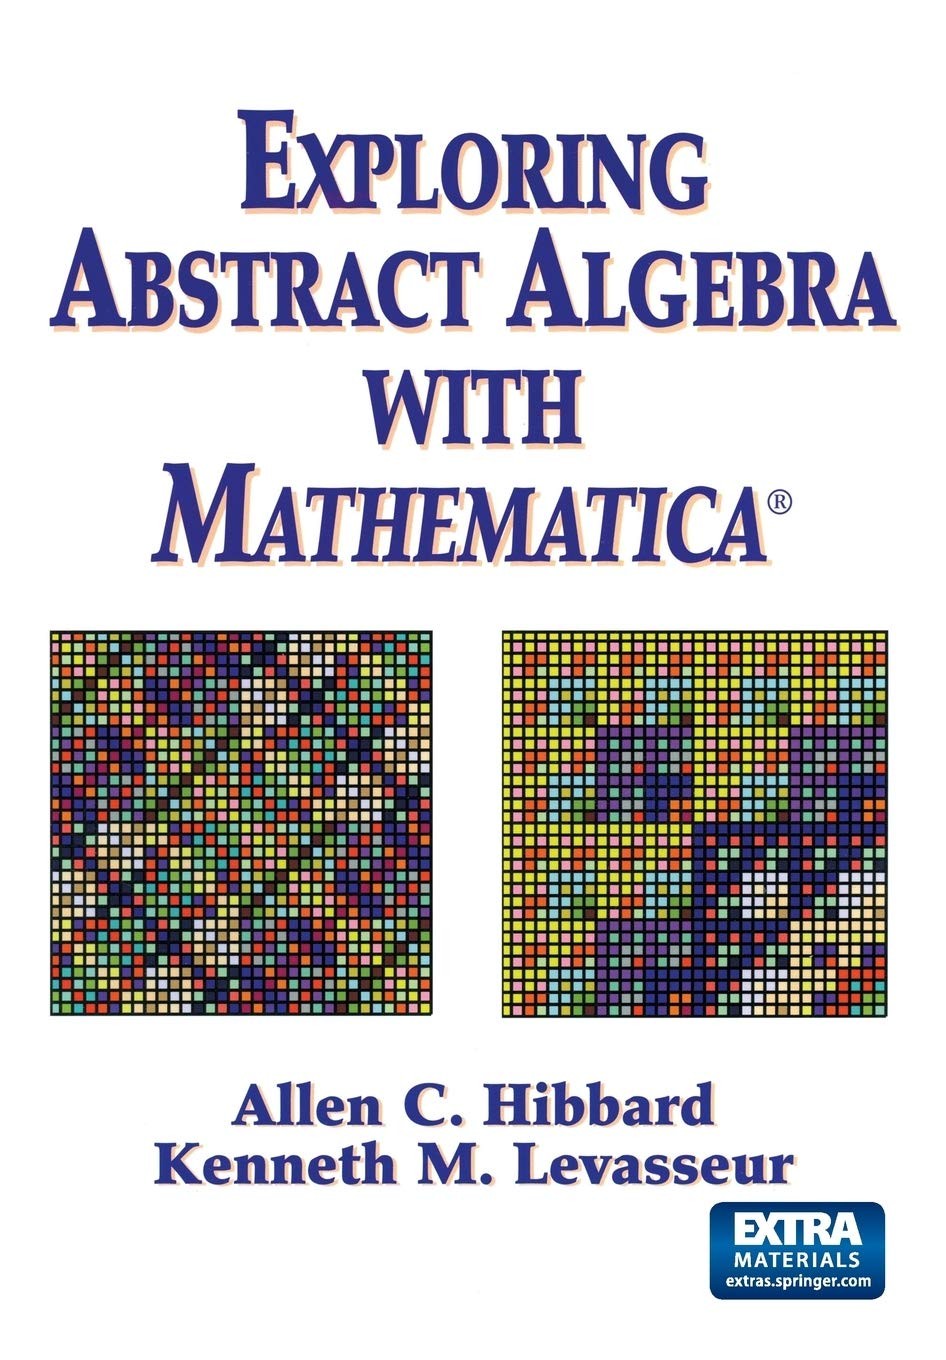 Exploring Abstract Algebra with Mathematica®